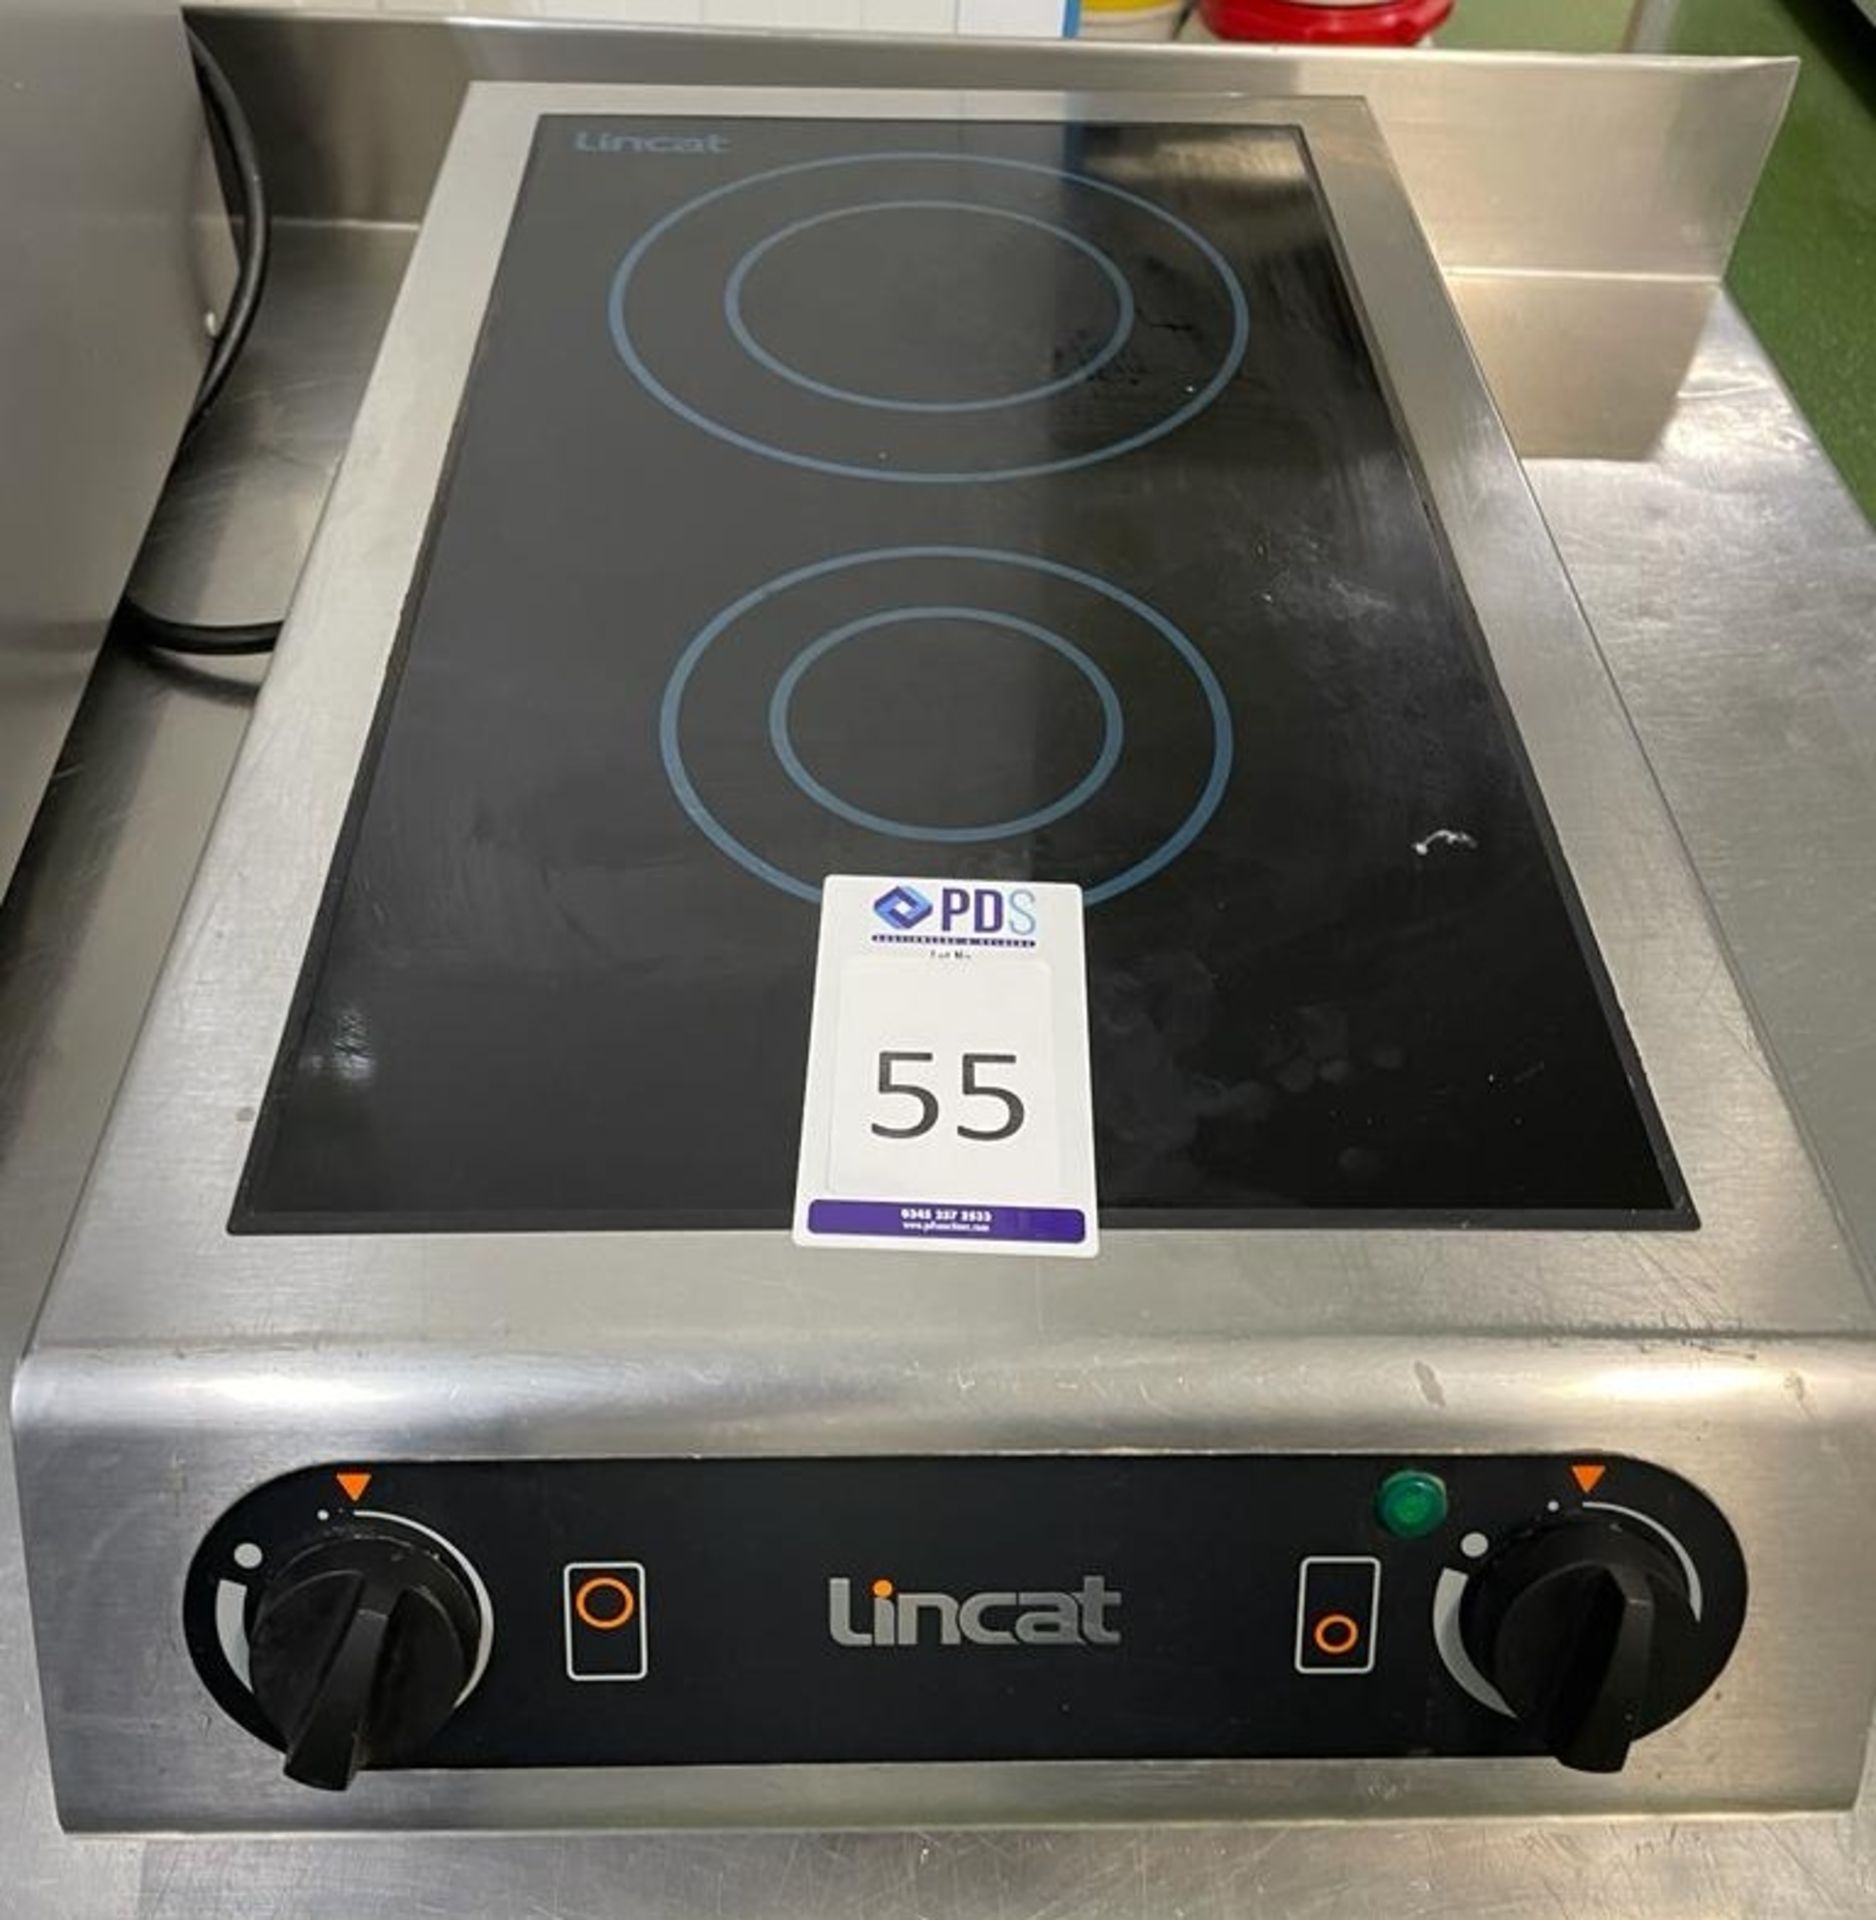 Lincat IH21 Countertop Induction Hob, 240v, Serial Number 30245847 (Location: NW London. Please